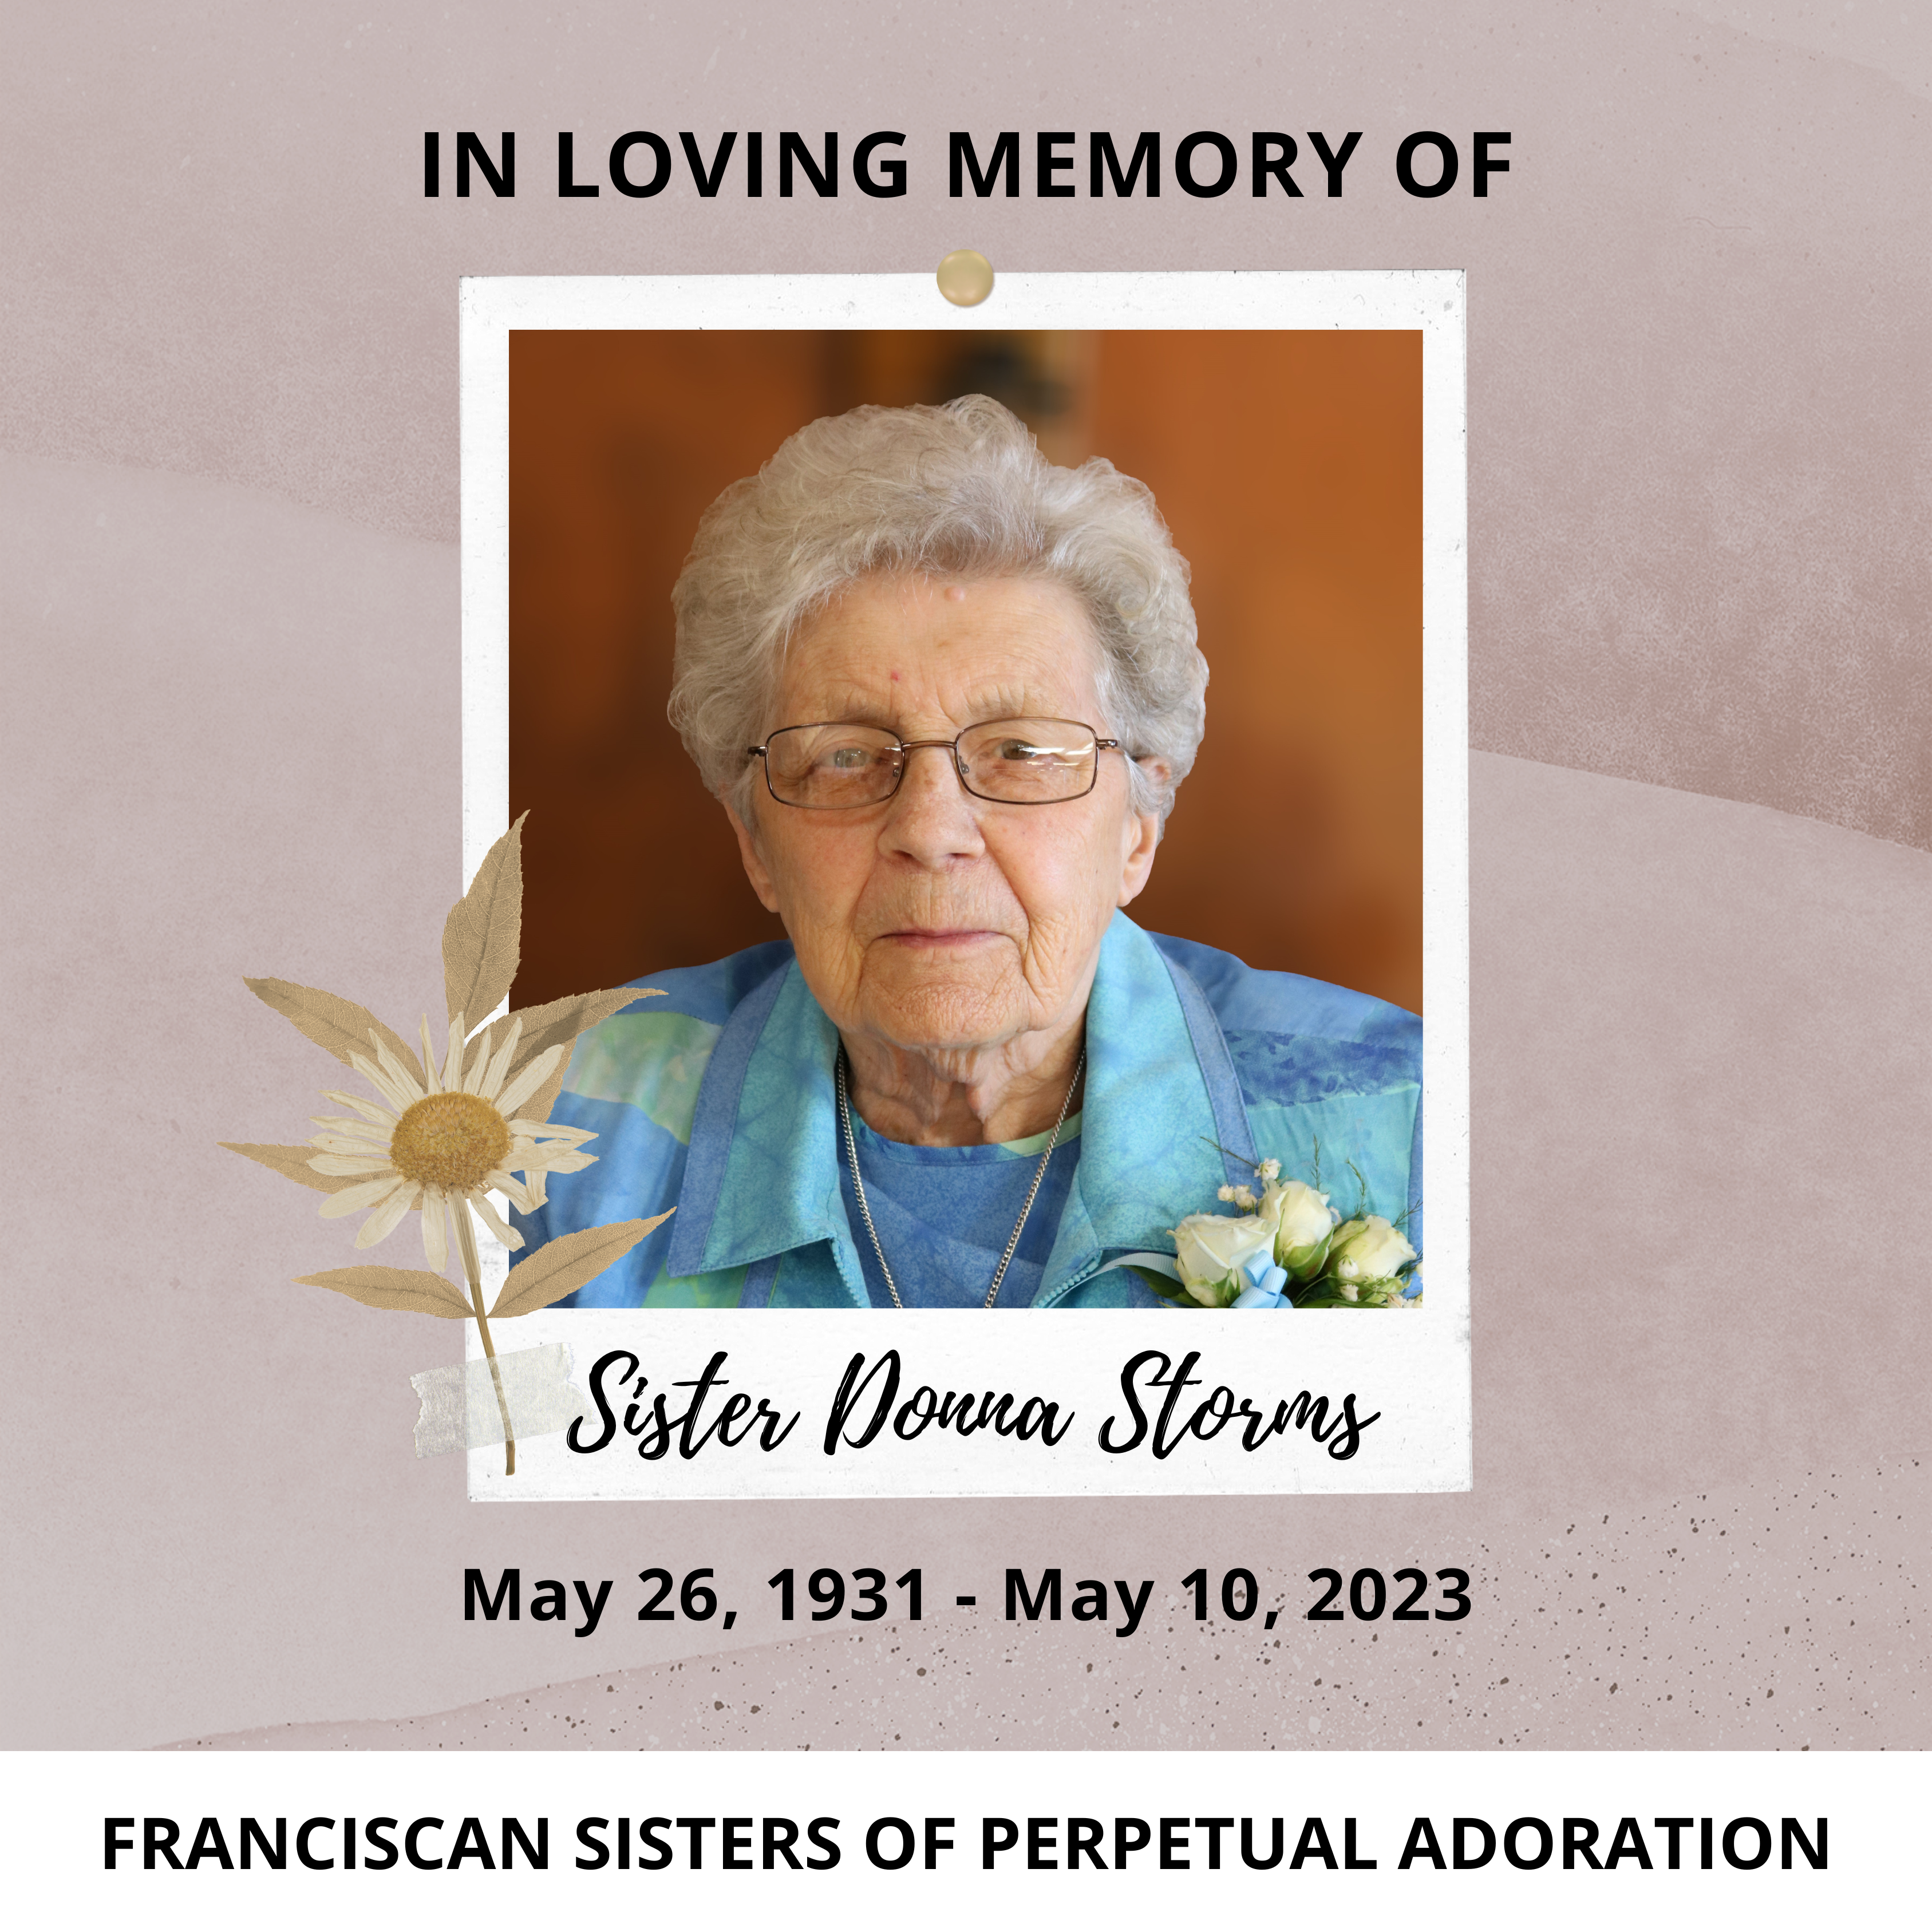 Franciscan Sister of Perpetual Adoration Donna Storms in loving memory